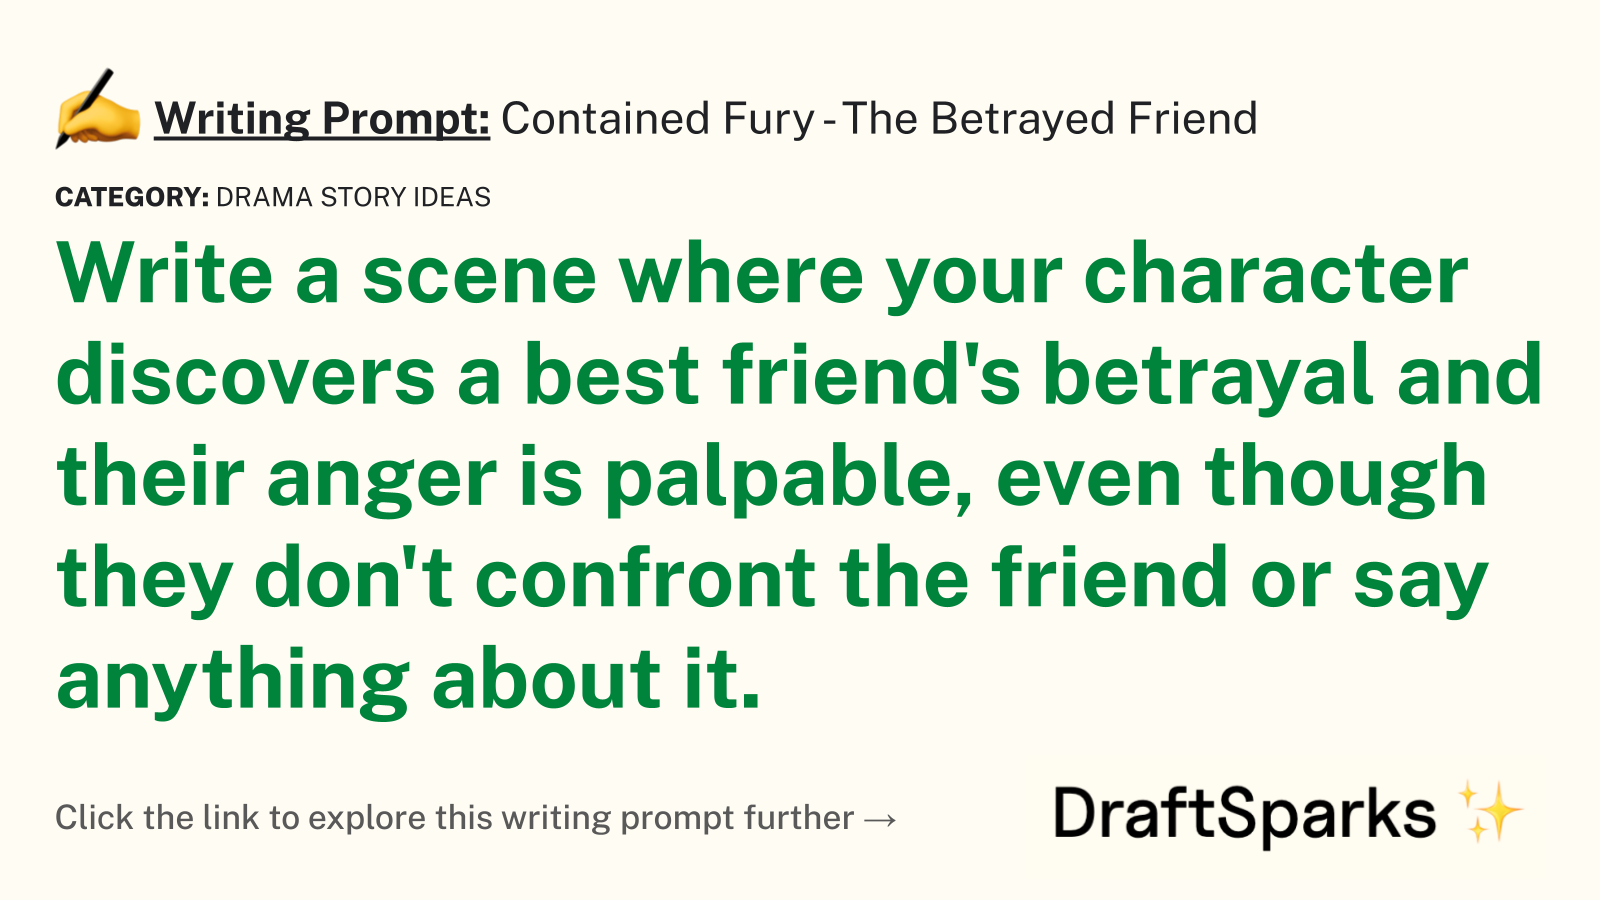 Contained Fury – The Betrayed Friend